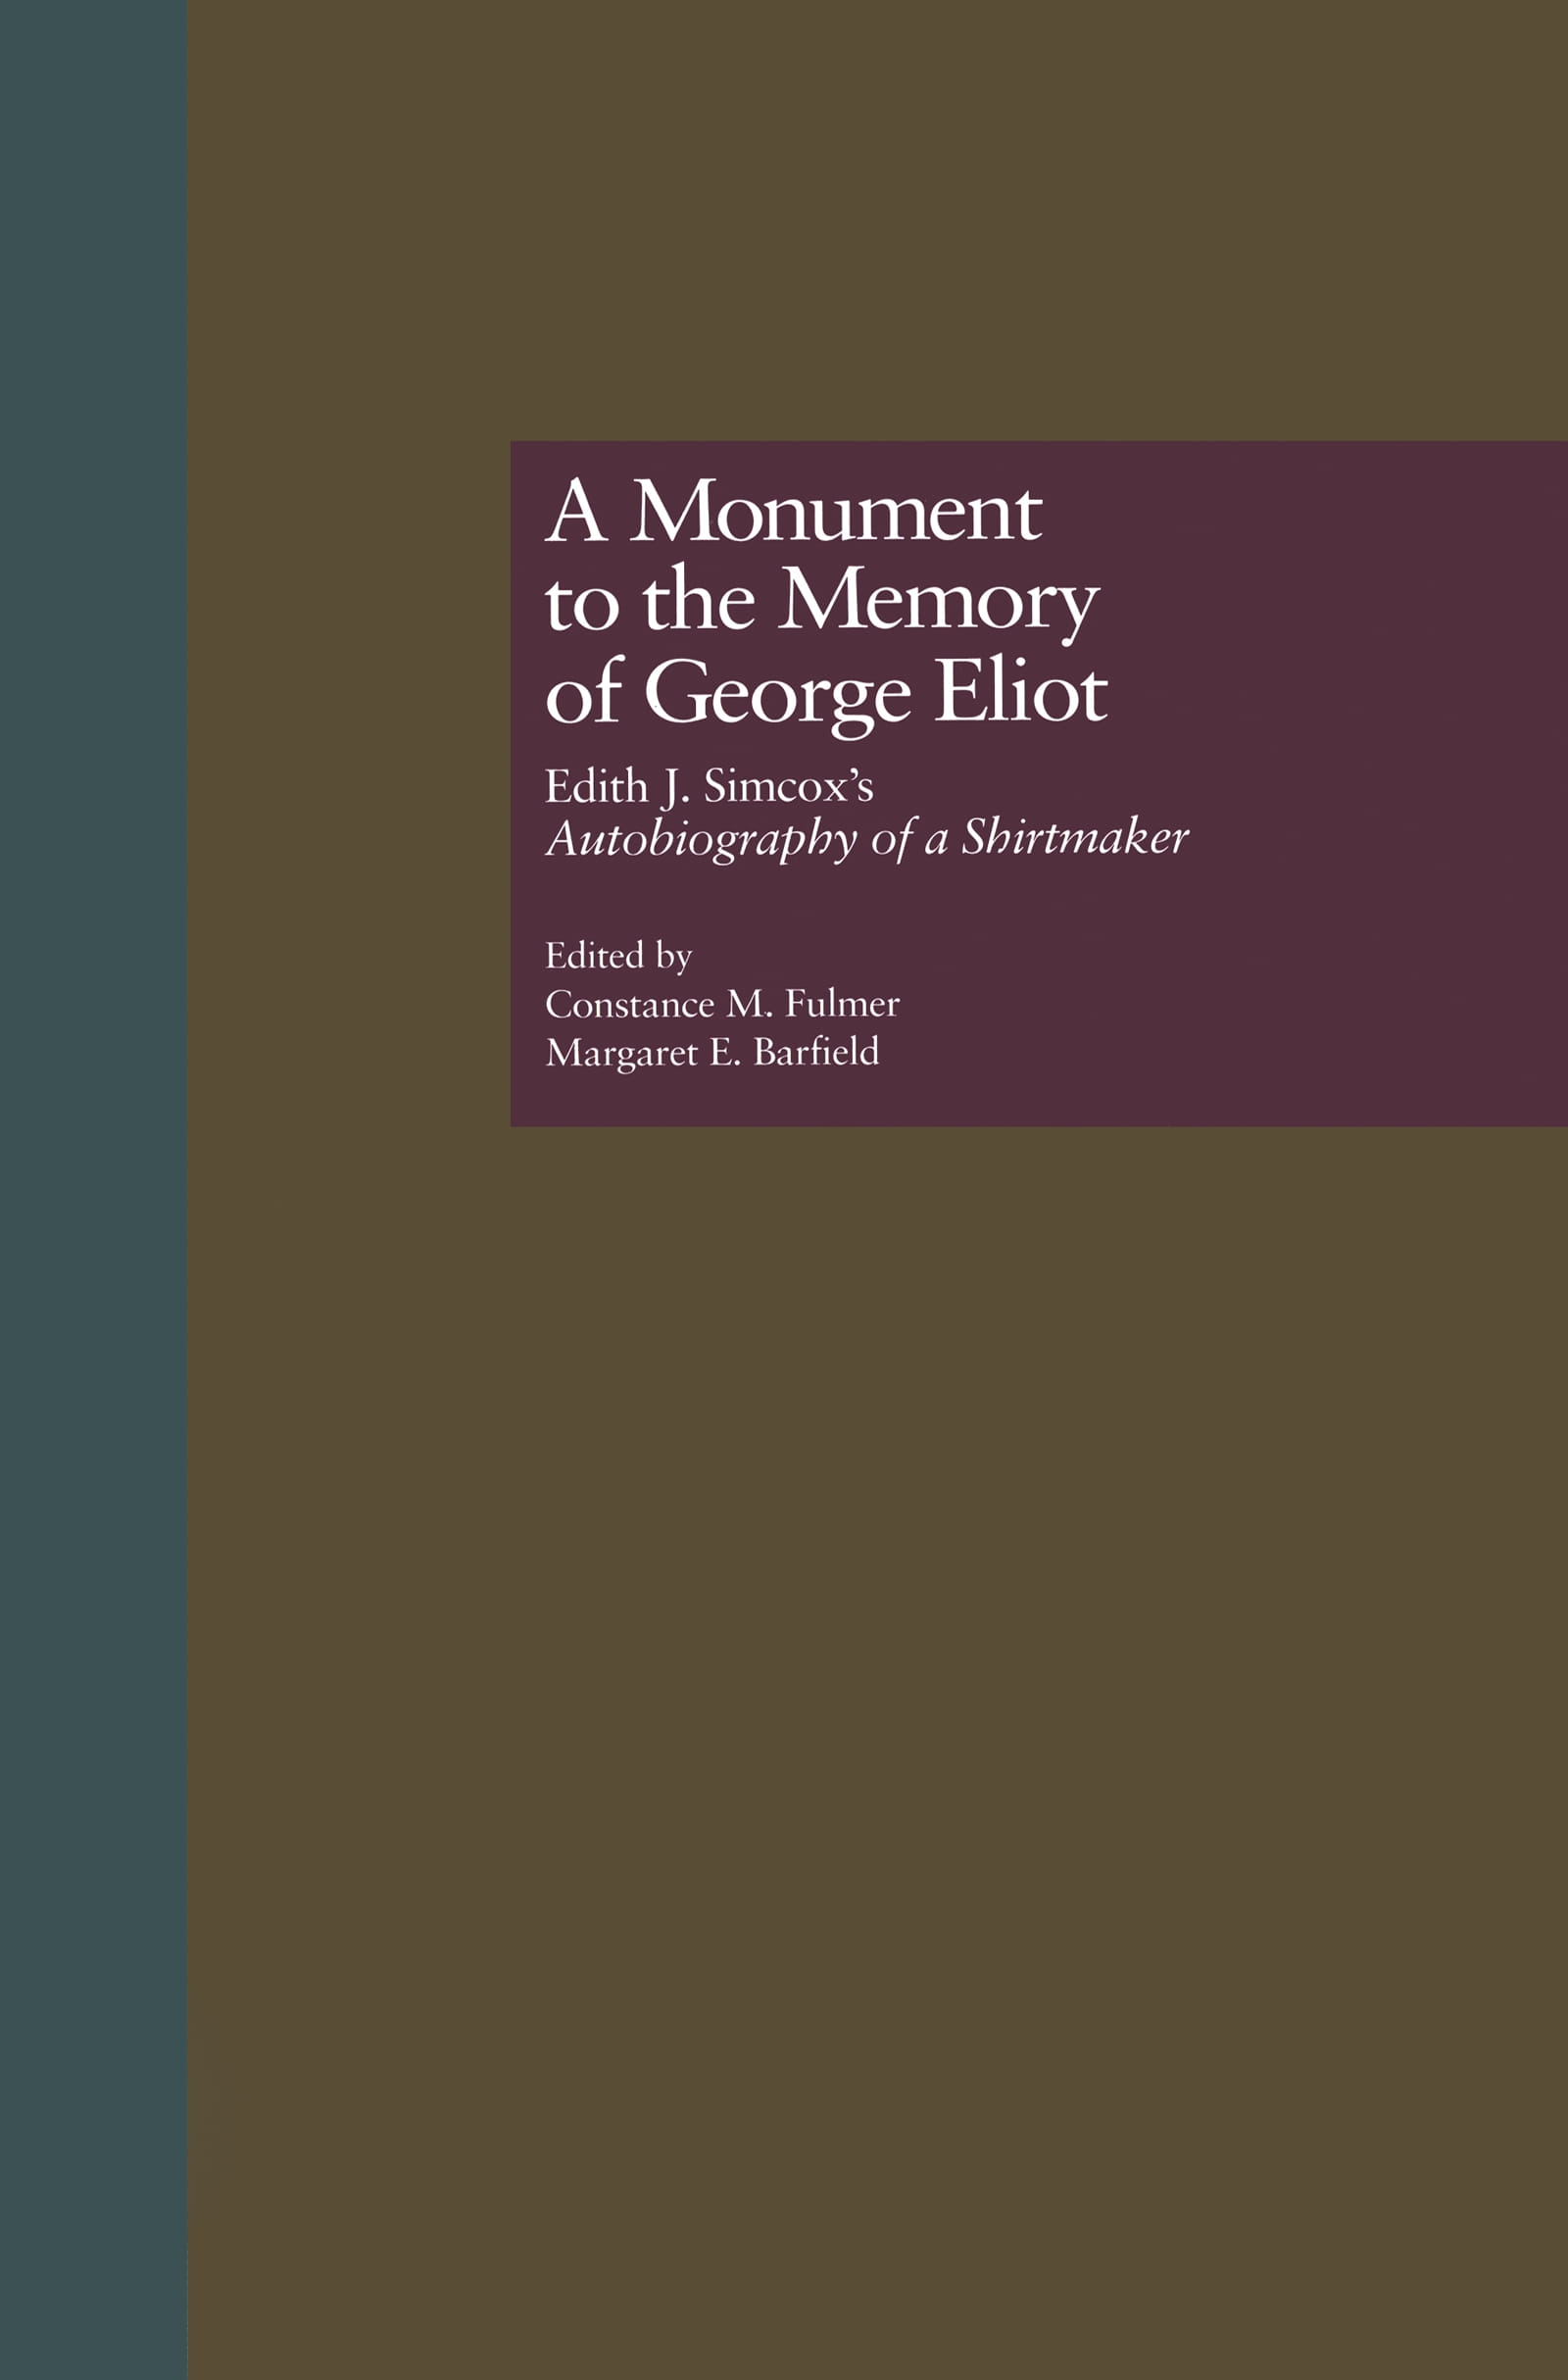 A Monument to the Memory of George Eliot: Edith J. Simcox’s Autobiography of a Shirtmaker